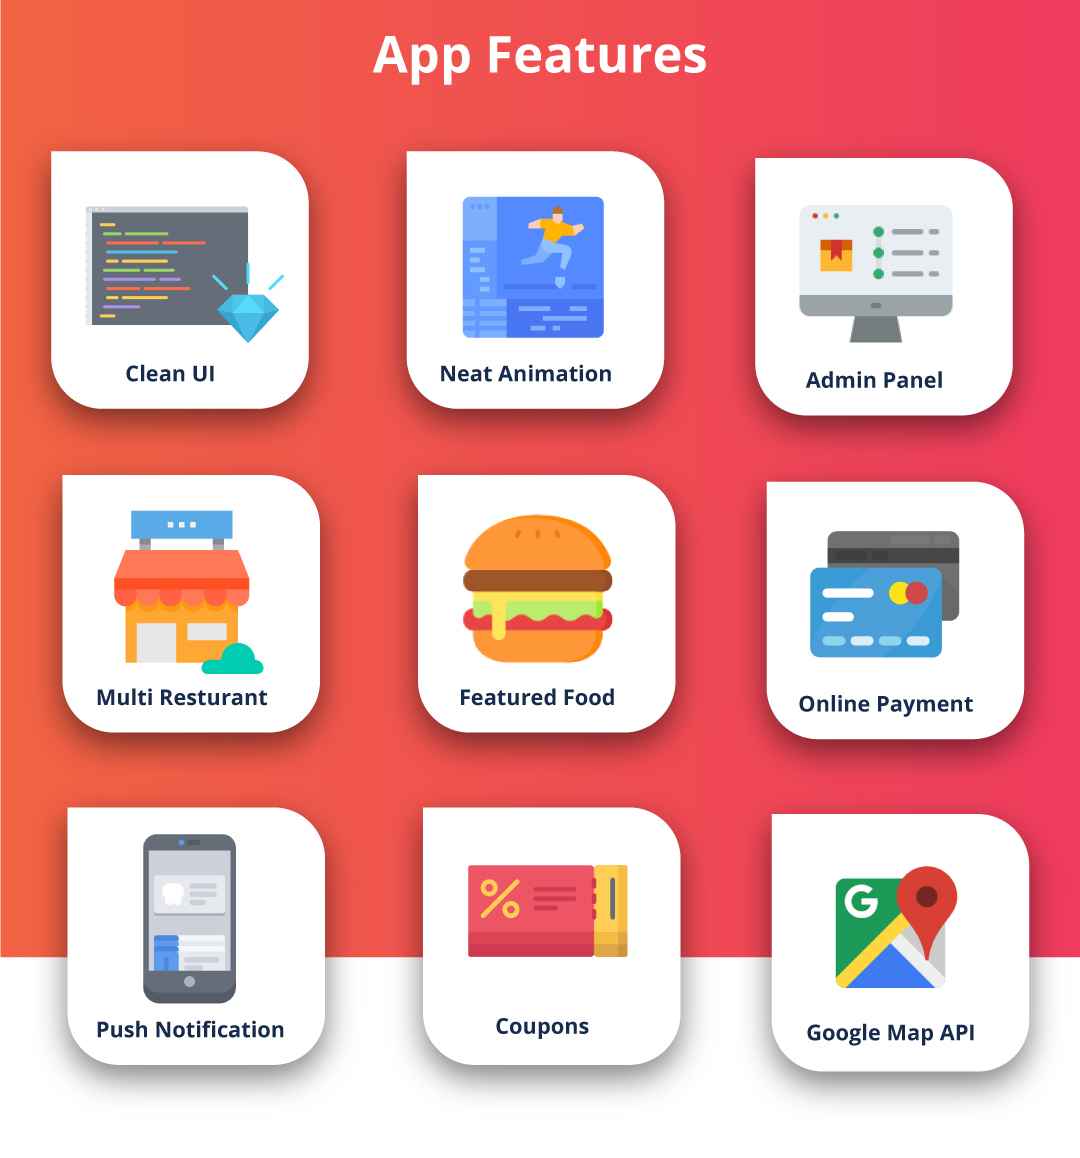 App Features - Foodlicious